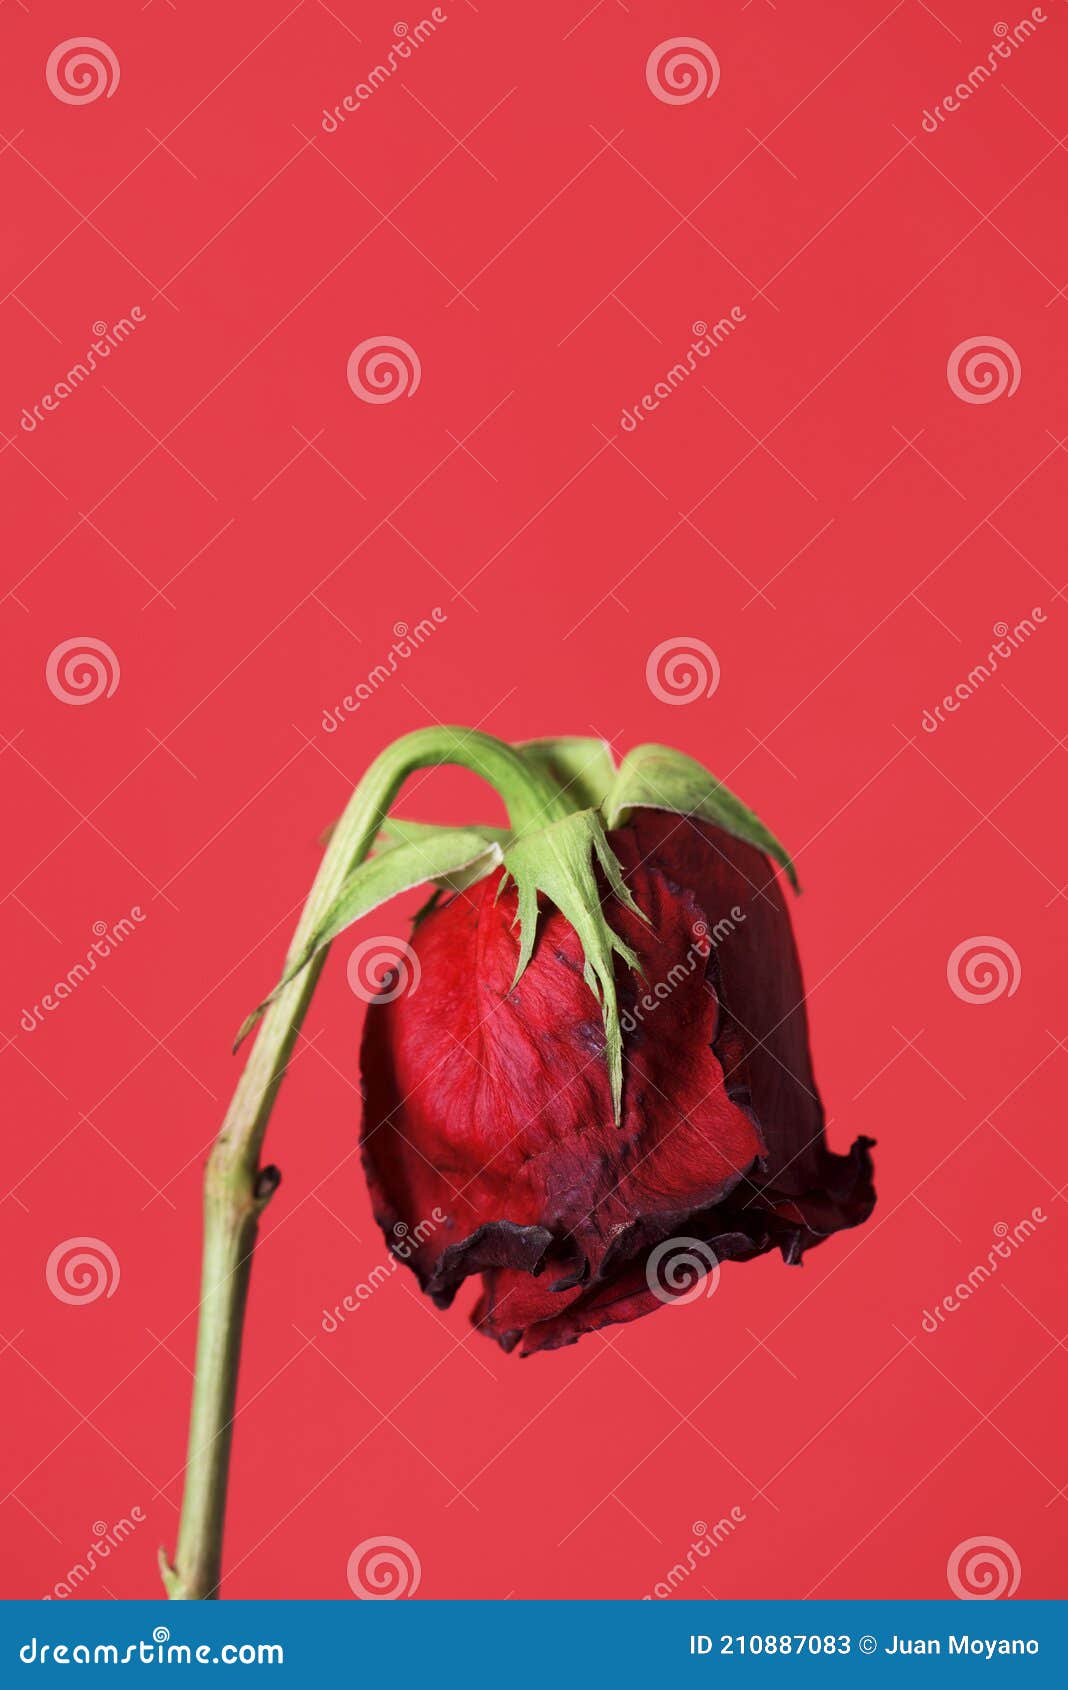 wilted red rose on a red background